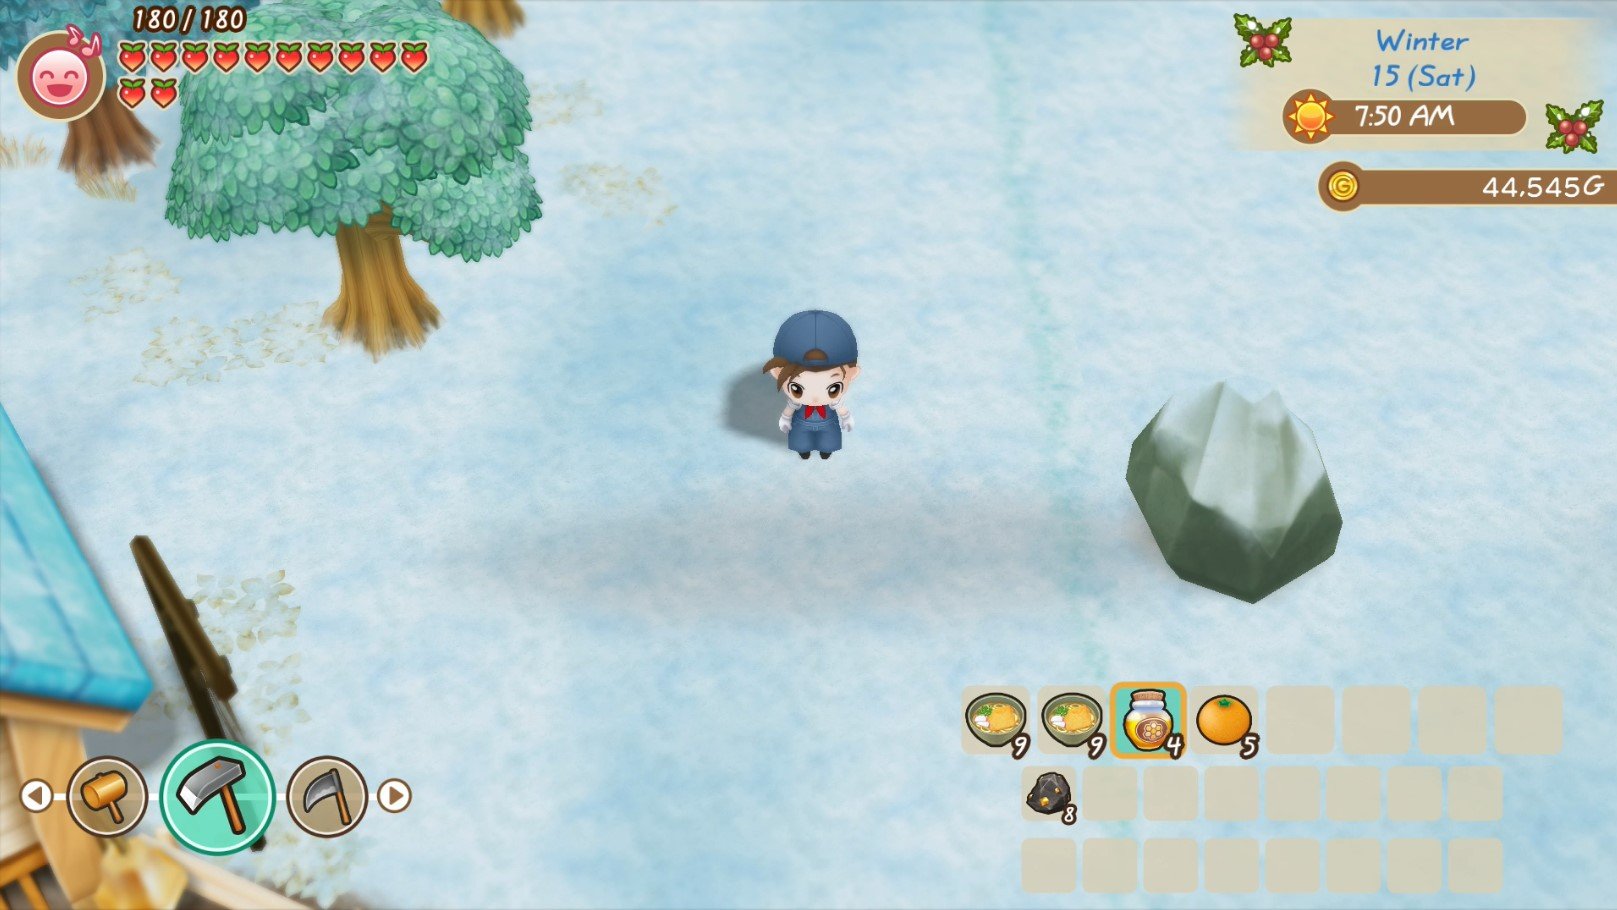  How to get Lumber and Stone in Story of Seasons: Friends of Mineral Town 